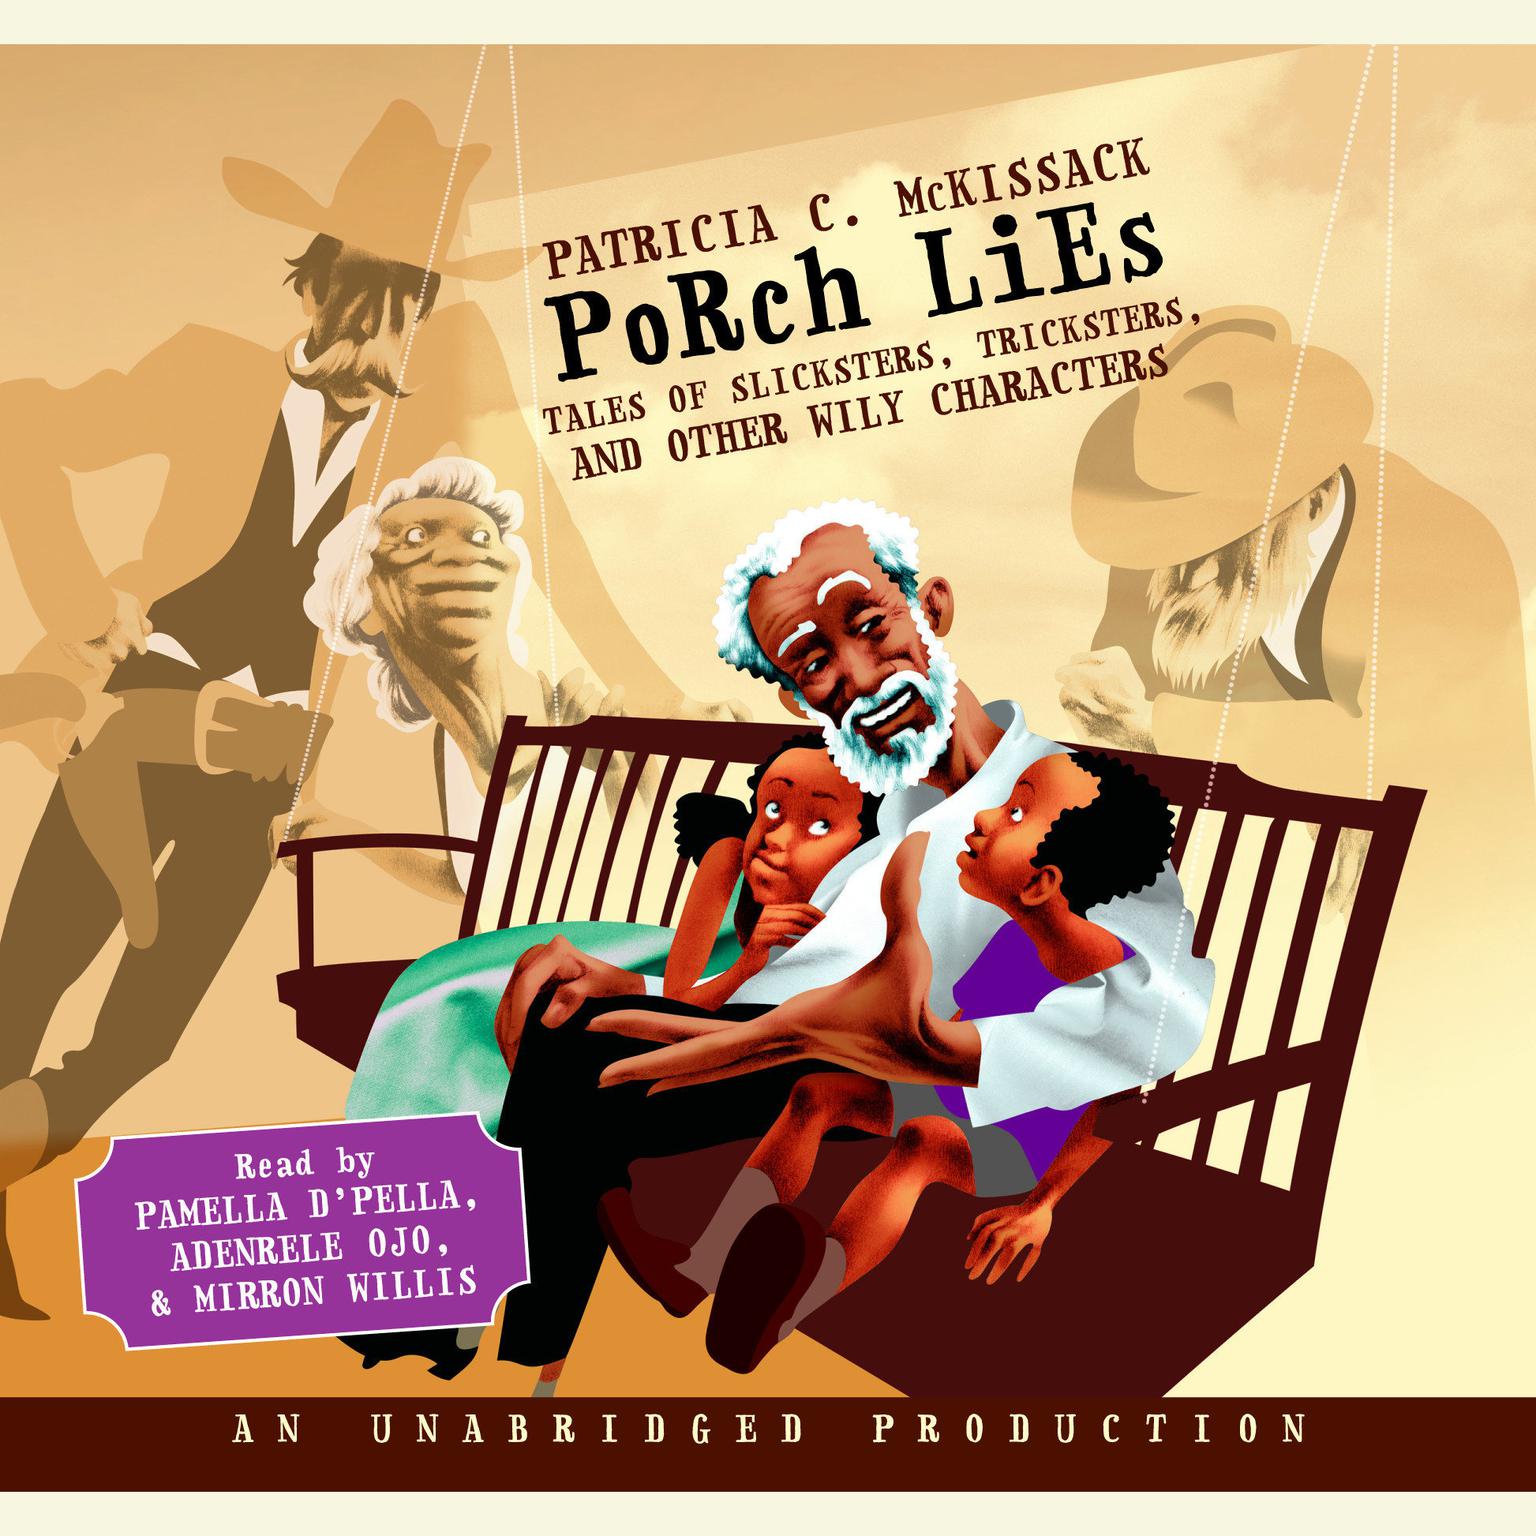 Porch Lies: Tales of Slicksters, Tricksters, and other Wily Characters Audiobook, by Patricia McKissack